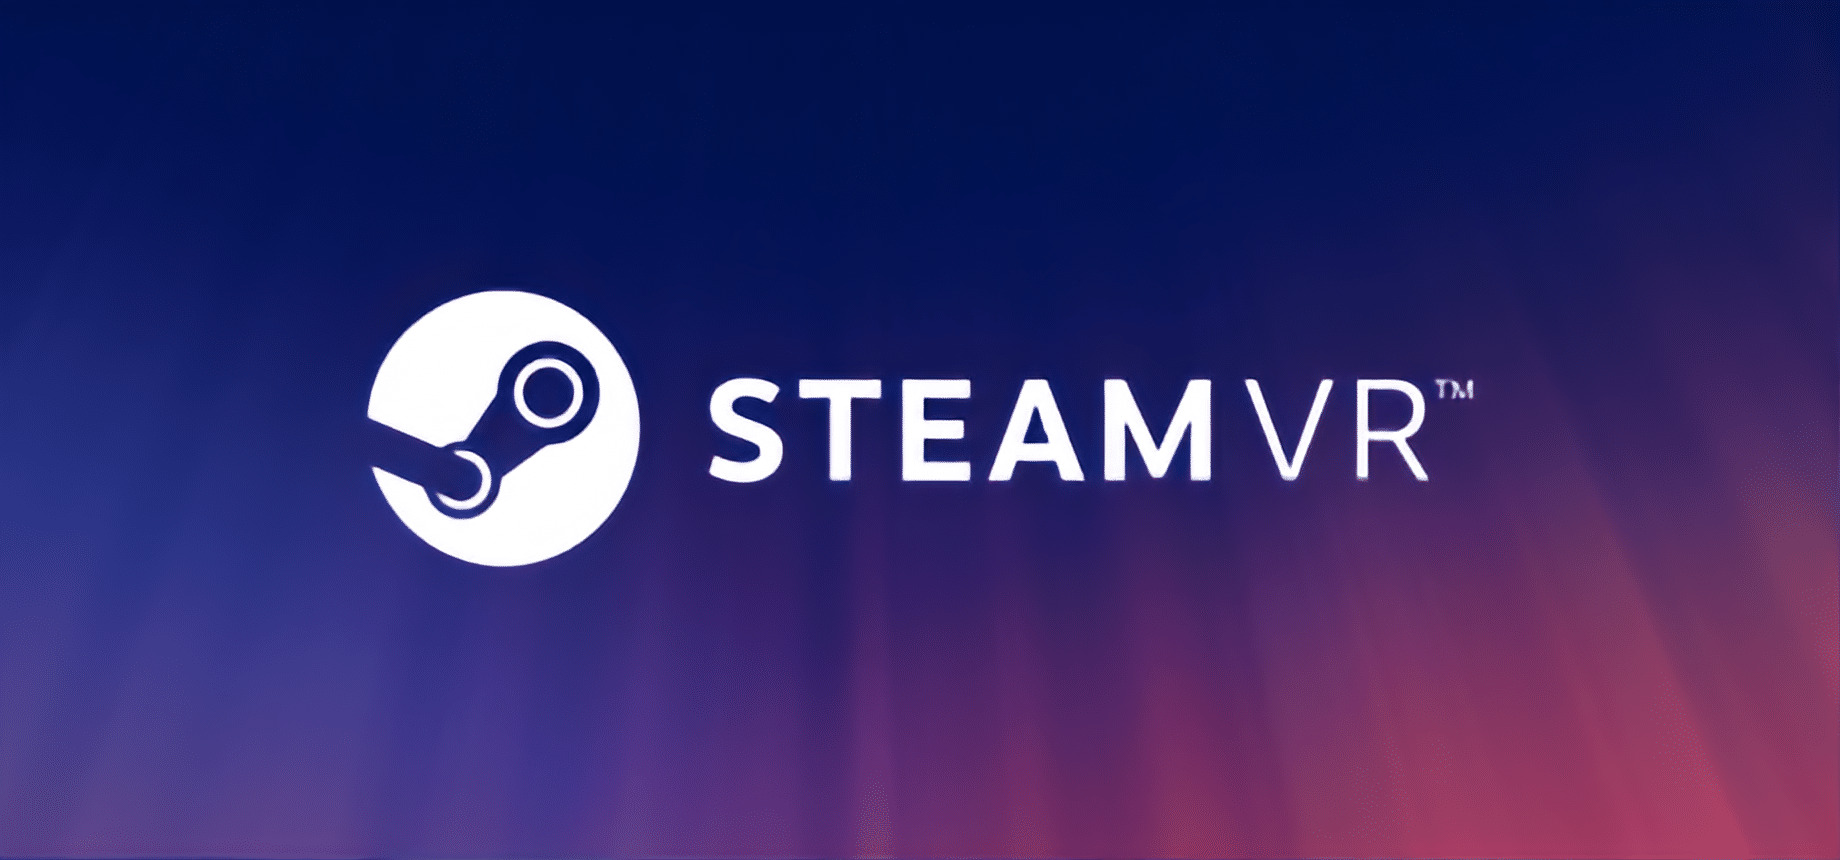 How To Download Steam VR